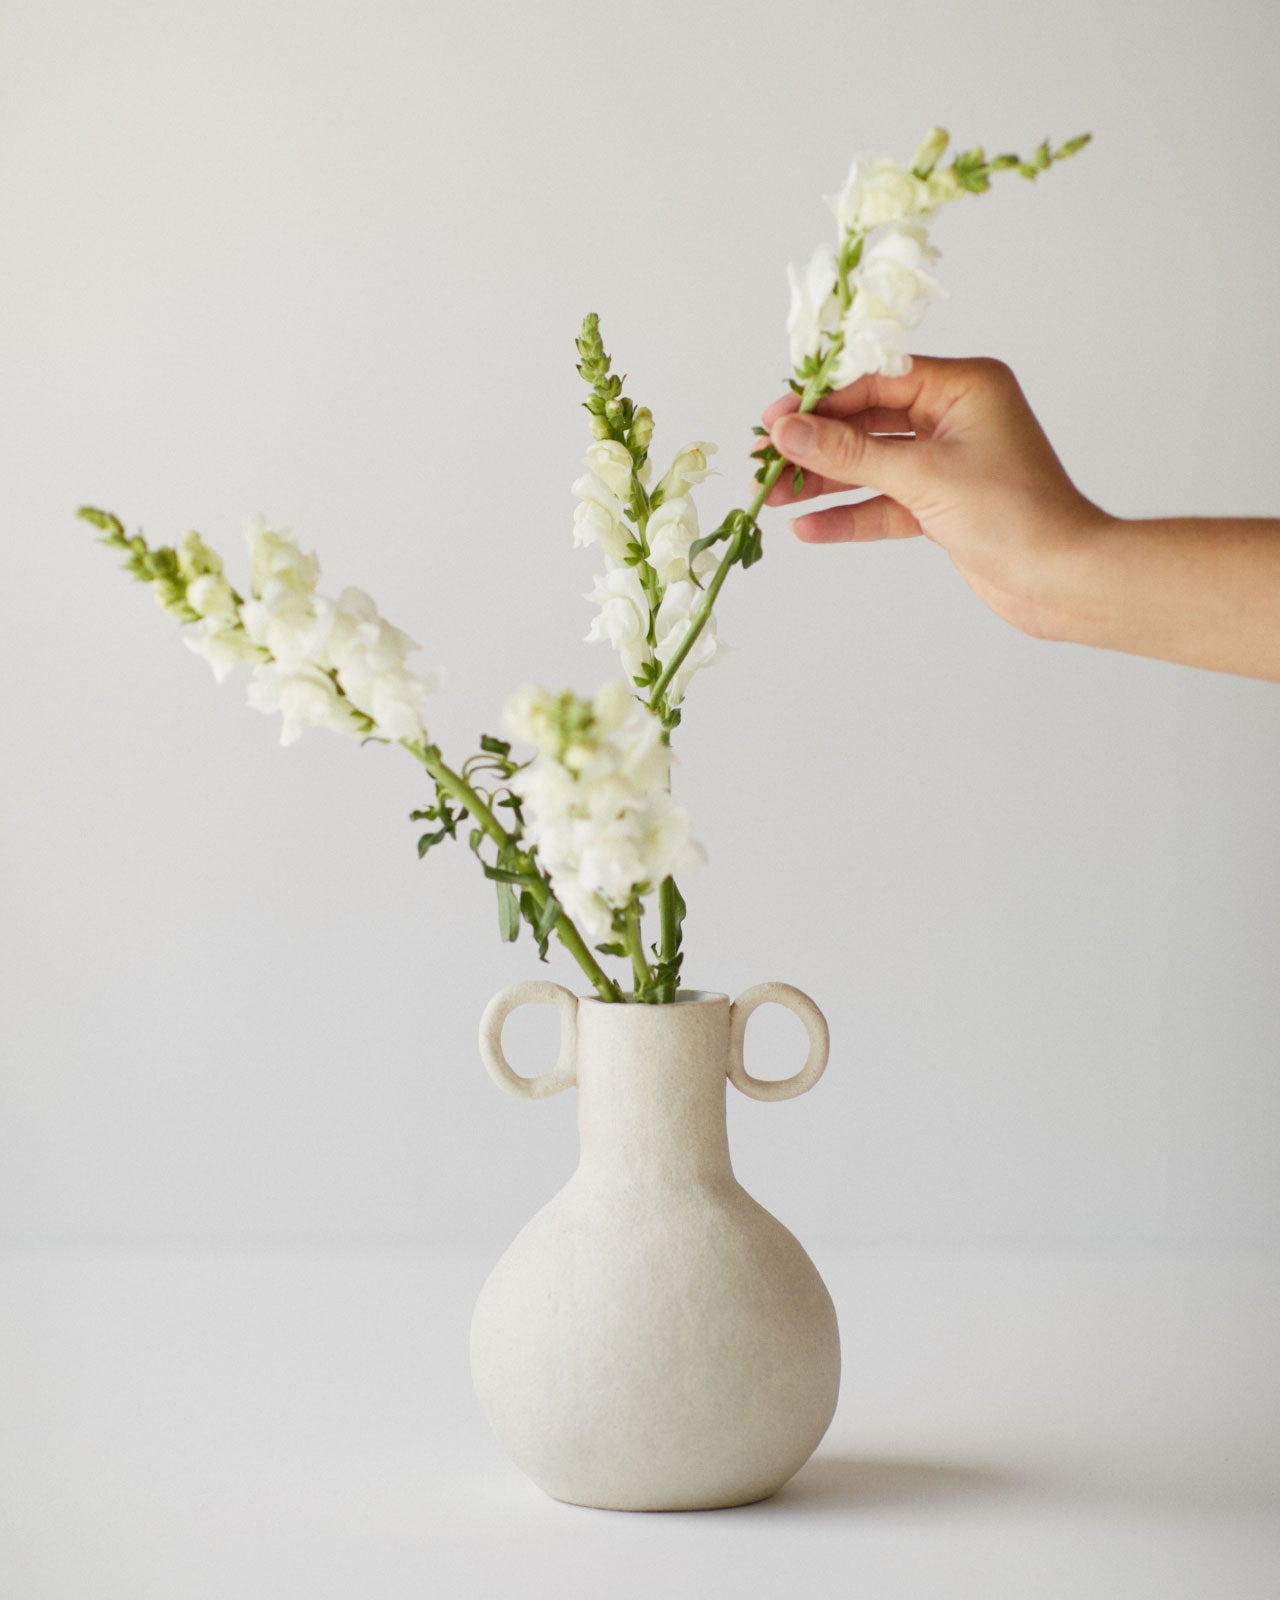 Pottery & Prosecco: Mother's Day Vase Workshop